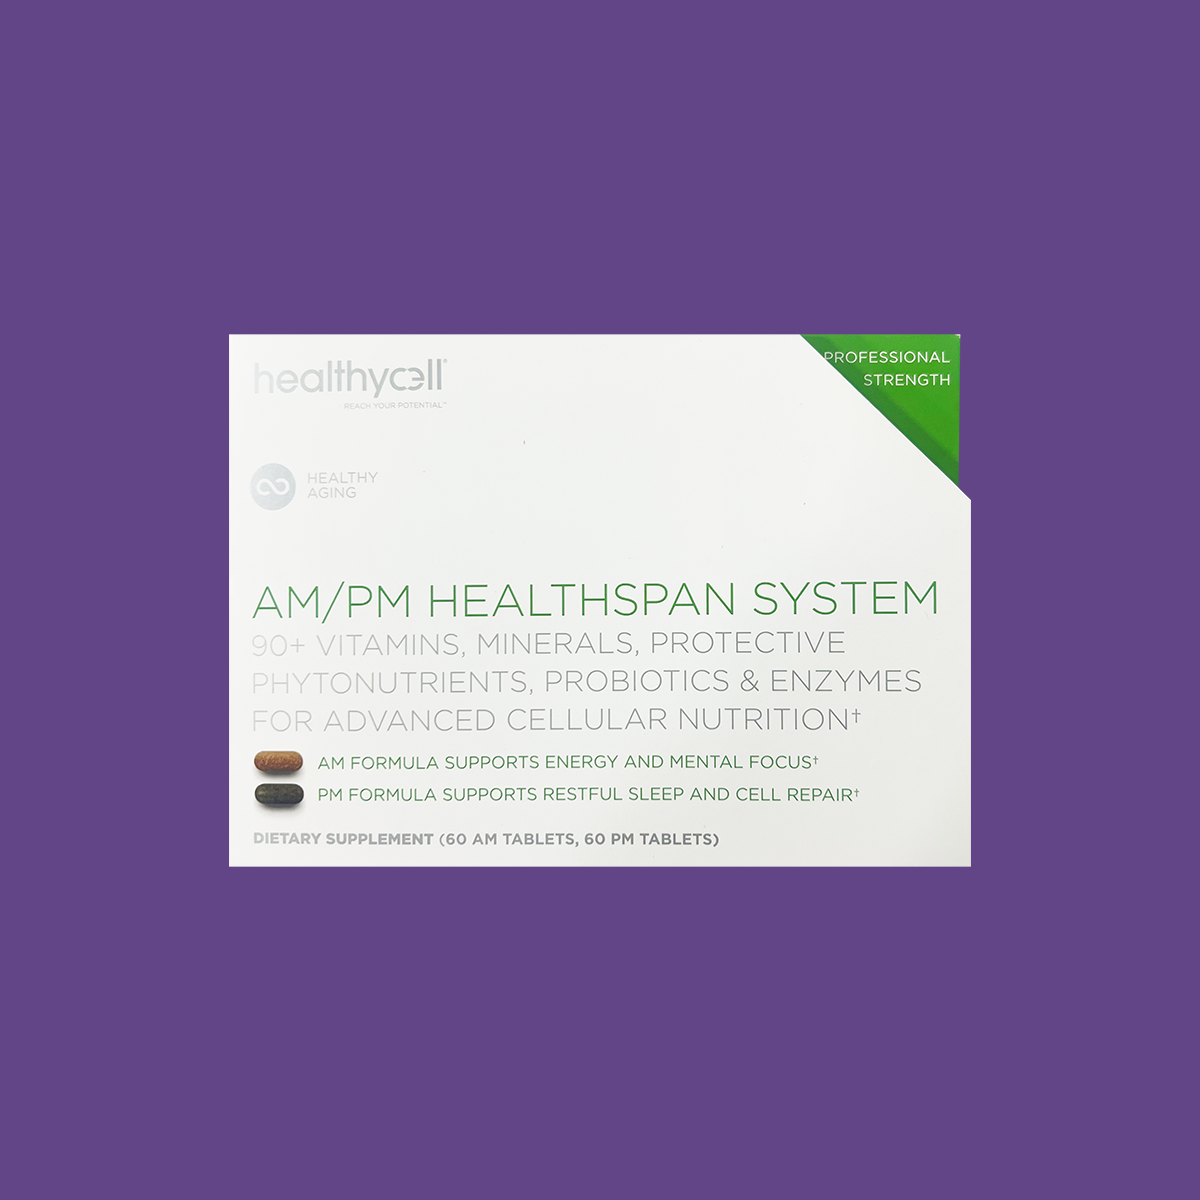 HealthyCell Multivitamin AM/PM Healthspan System (30 day Supply)